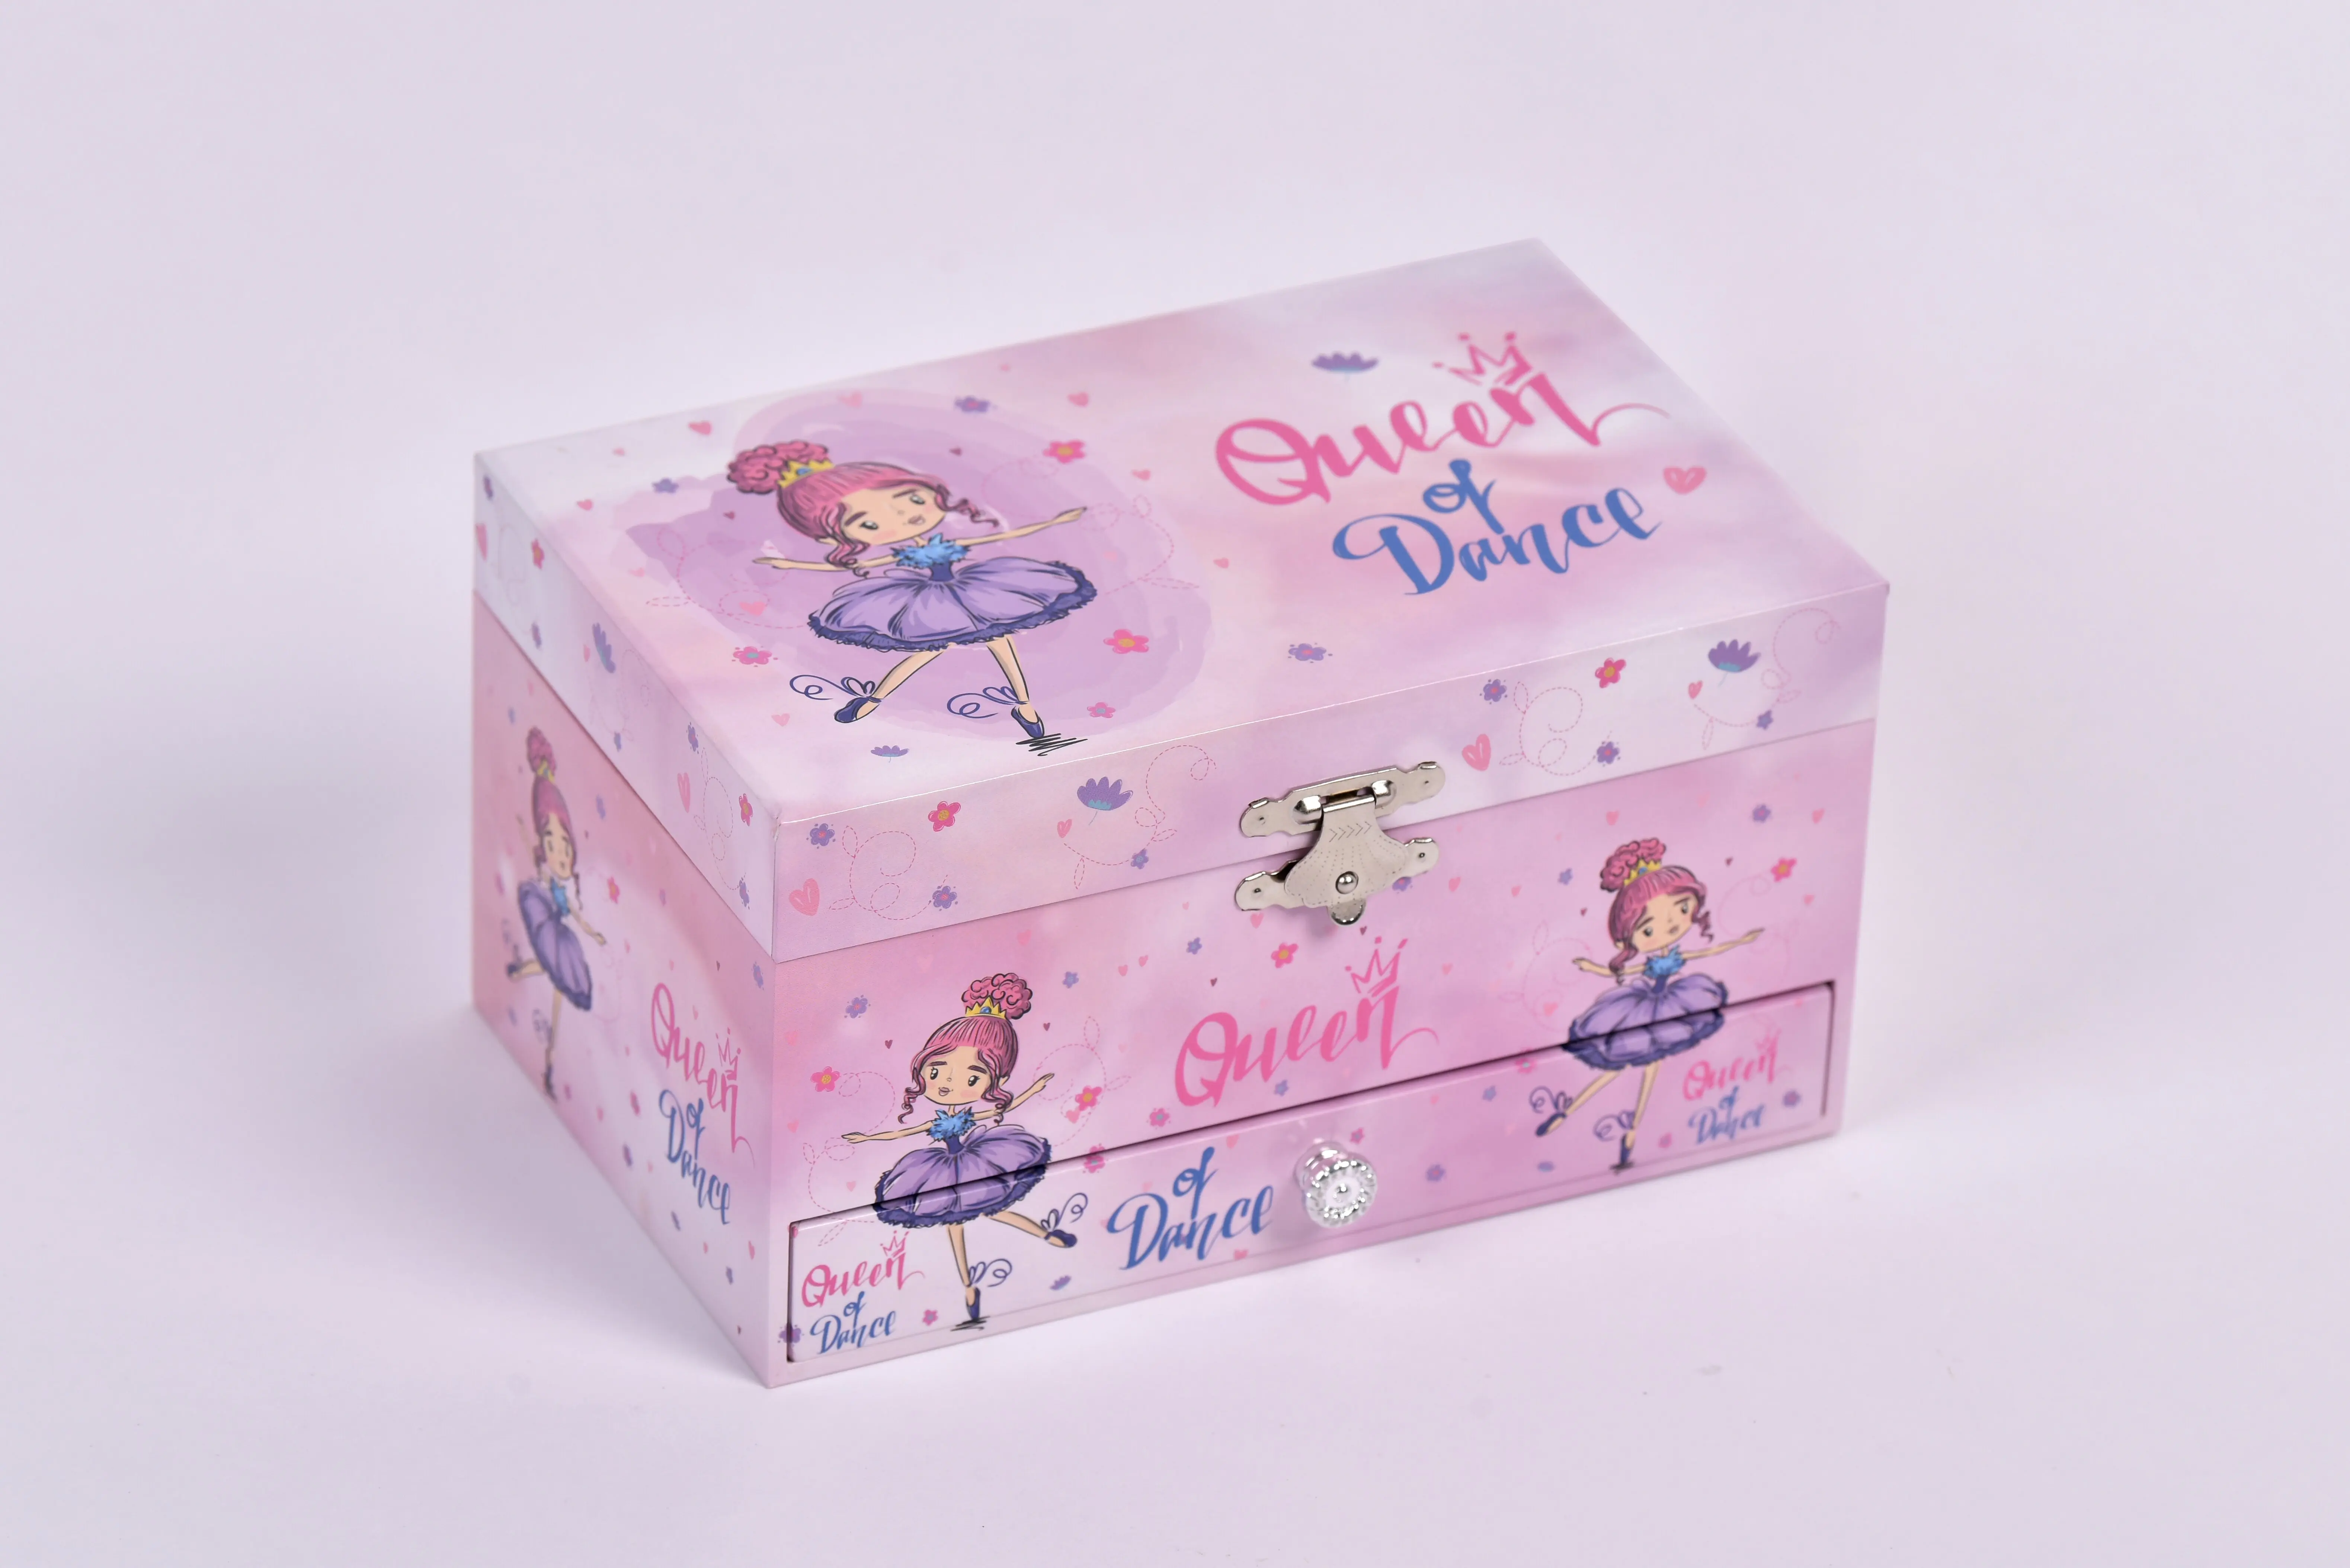 Ever Bright Custom Hot sale Unicorn 7 inch MDF Paper Wooden Ballerina Jewelry Music Box For Baby Girl Gifts